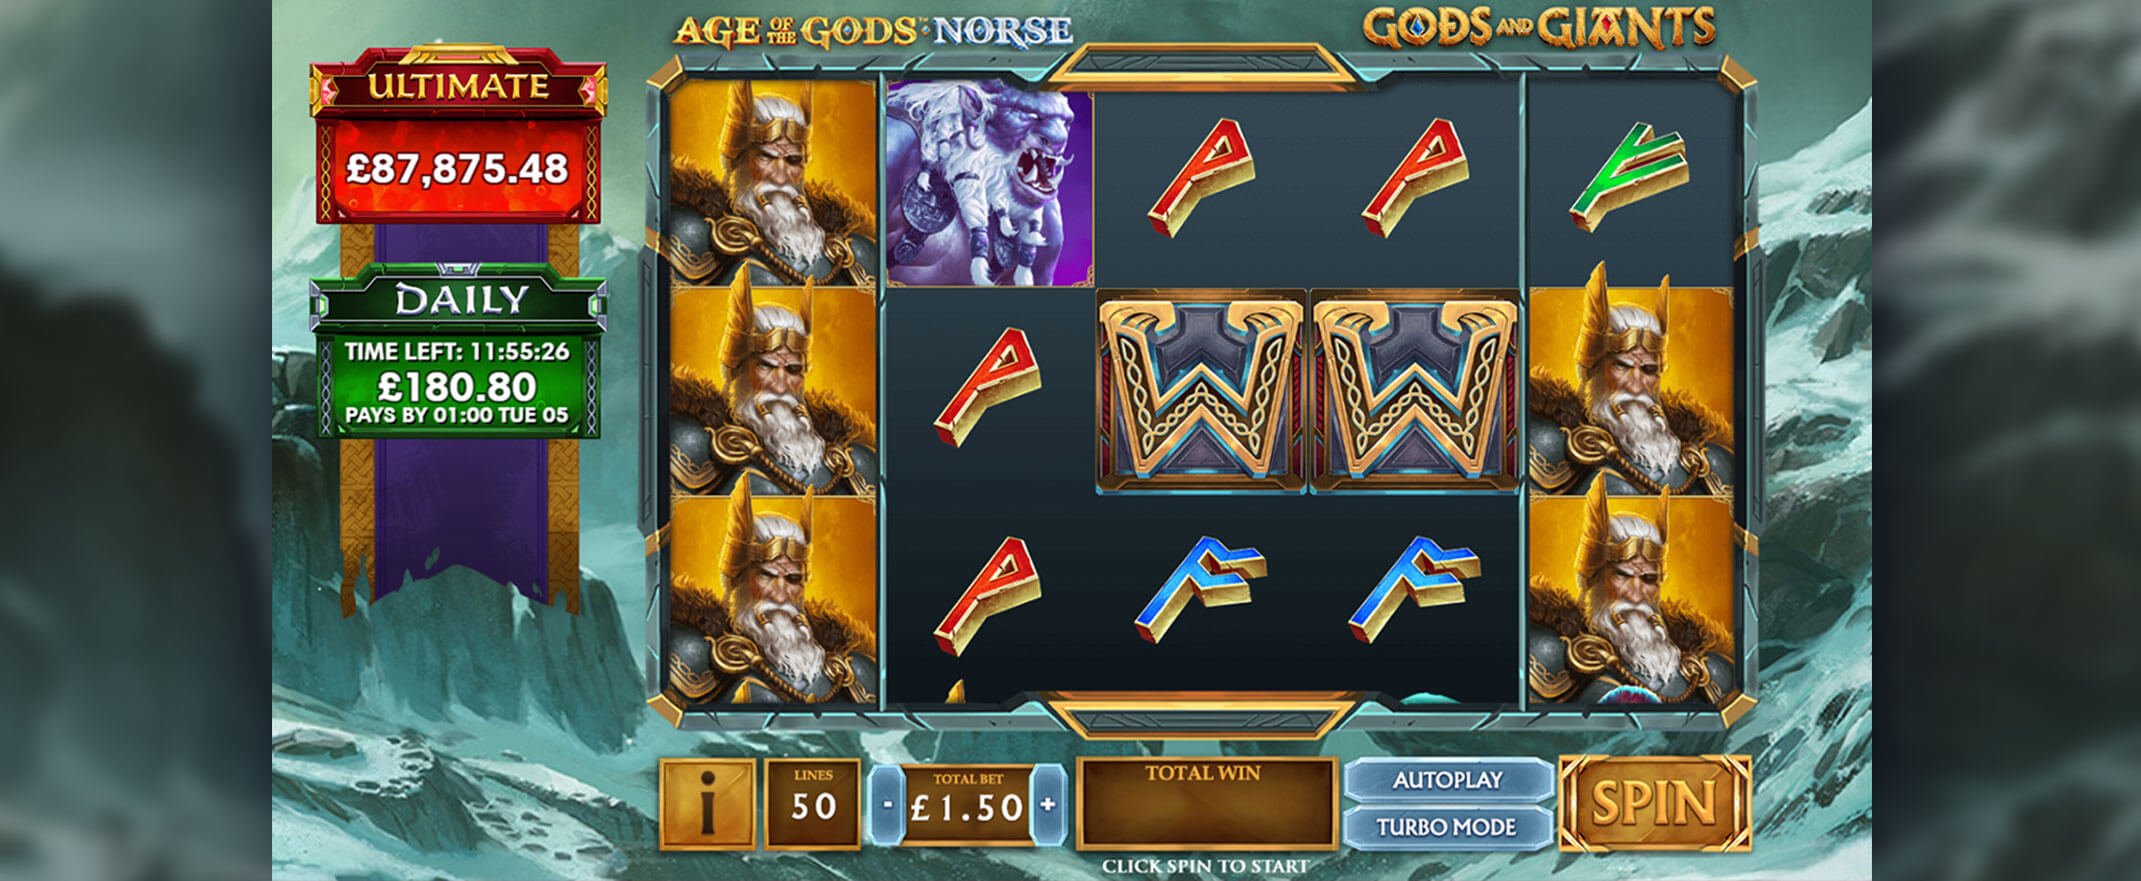 Age of the Gods Norse: Gods and Giants slot review screenshot